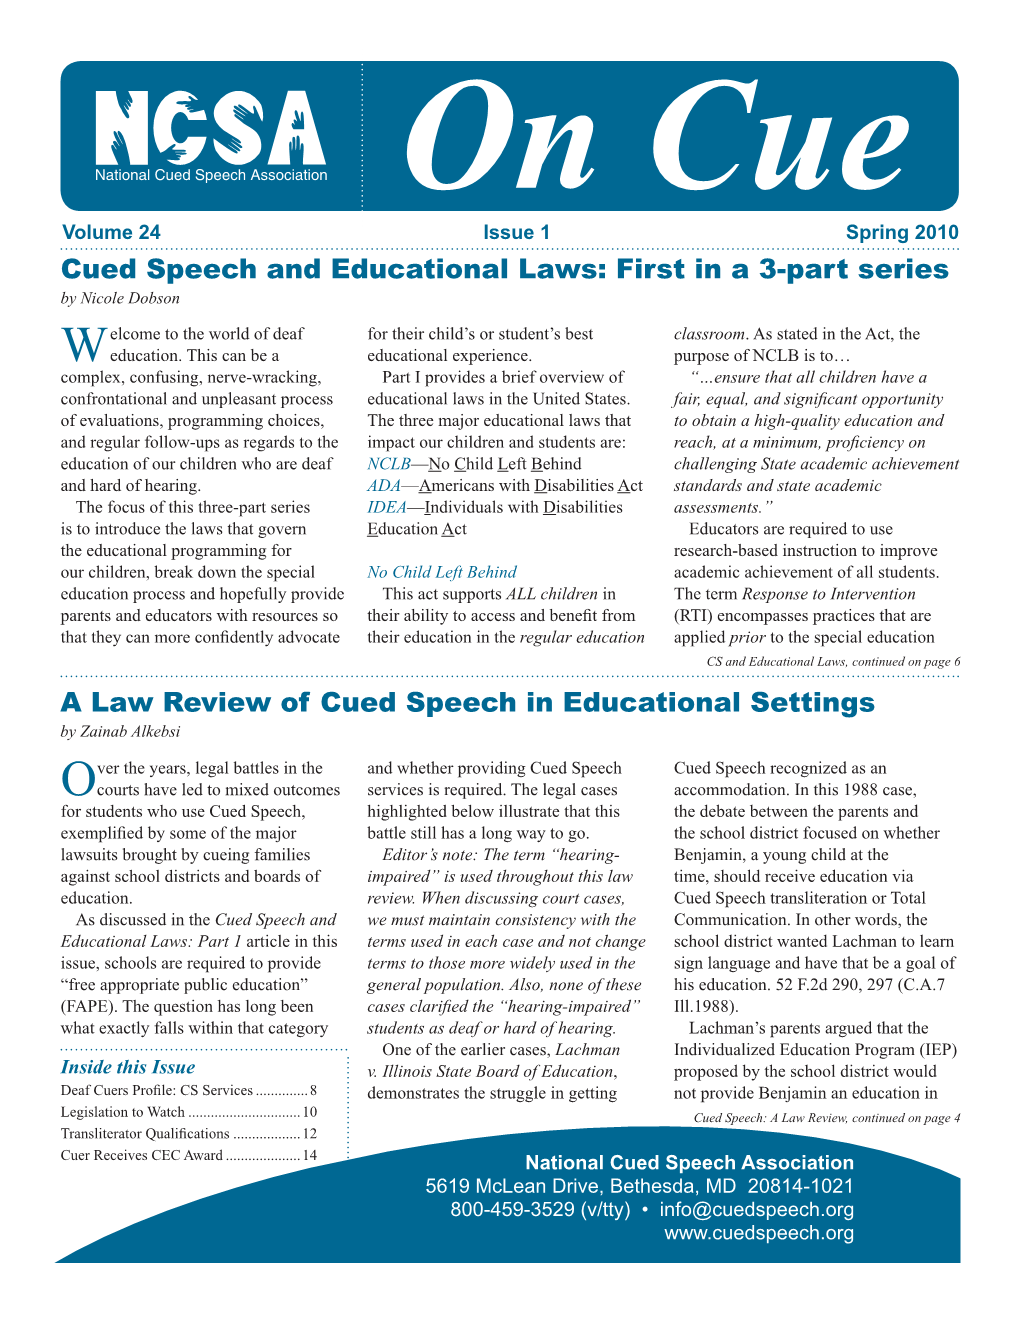 Cued Speech Association on Cue Volume 24 Issue 1 Spring 2010 Cued Speech and Educational Laws: First in a 3-Part Series by Nicole Dobson